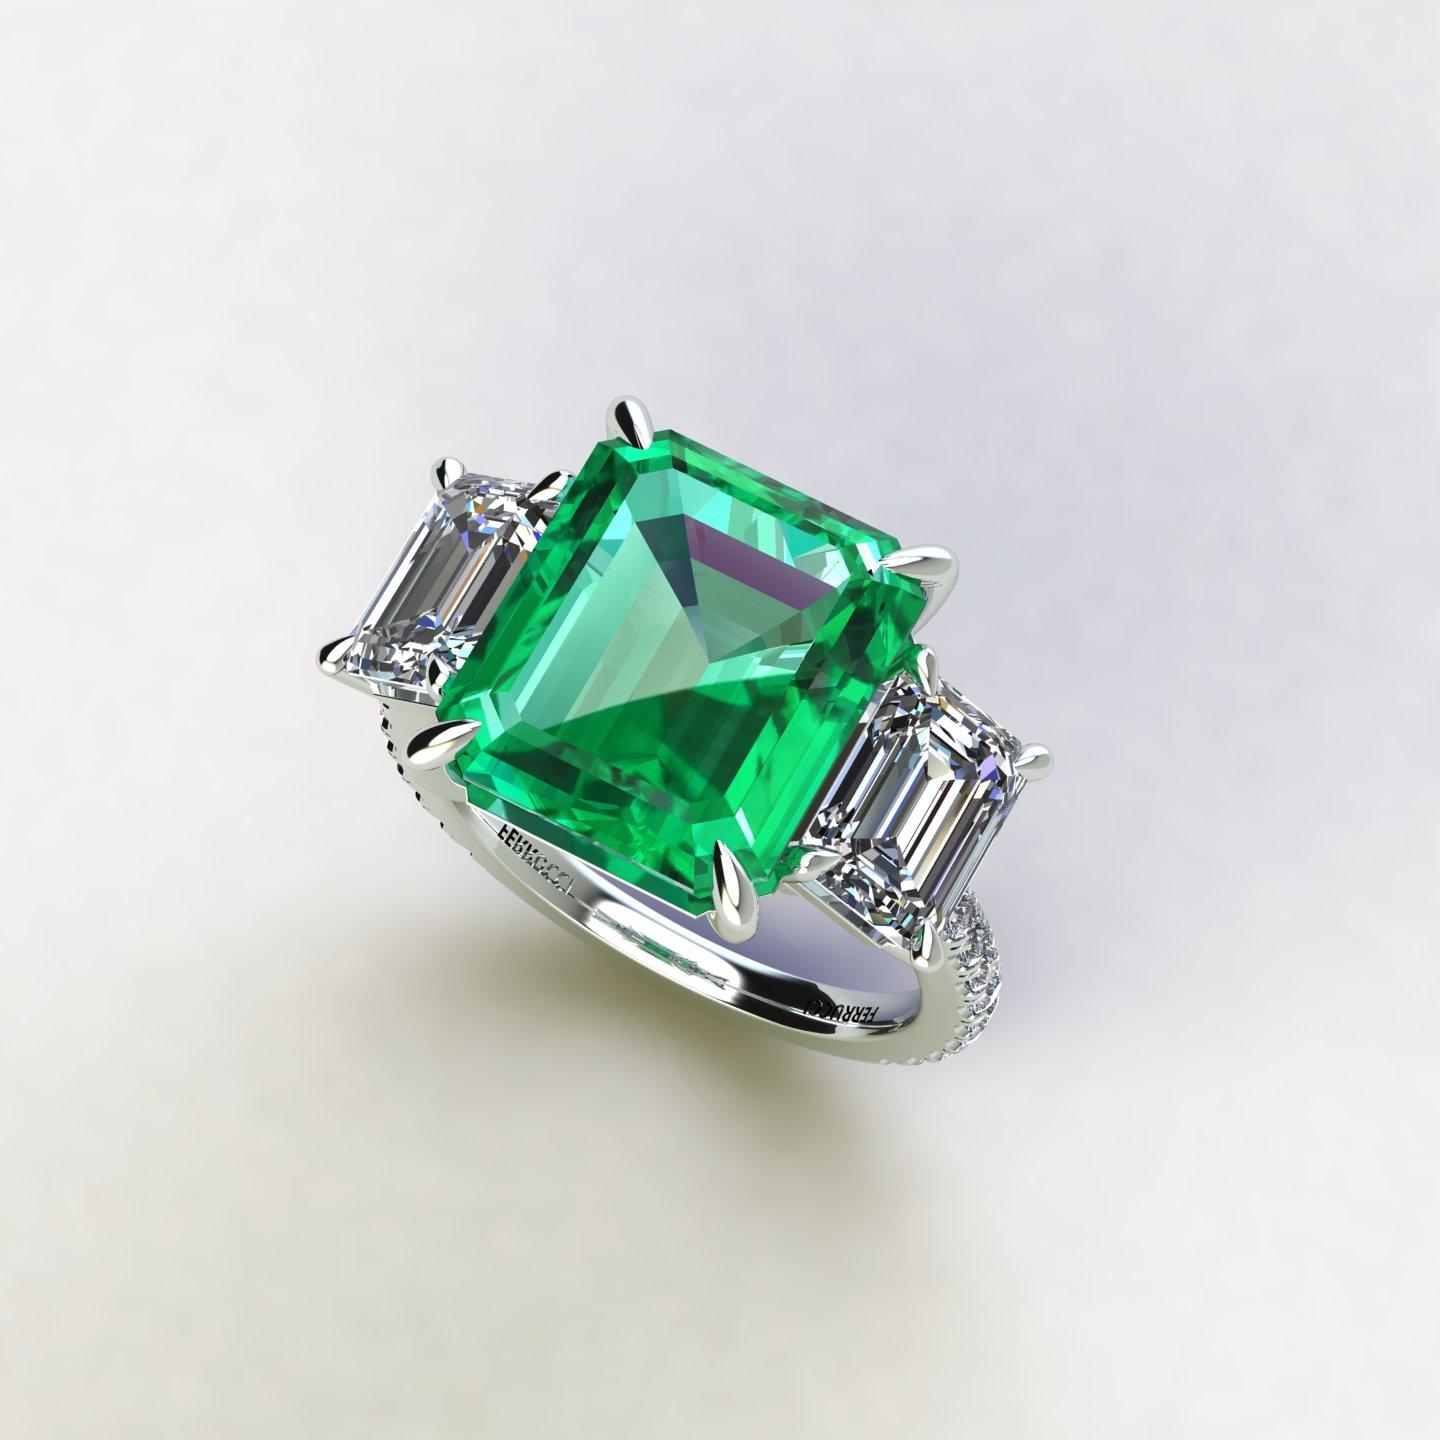 GRS Certified 6.31 carat Colombian emerald cut Emerald, very high quality color,  sided by two 1 carat Emerald white diamond, H color, VS clarity, GRS Certified embellished by a pave' of bright diamonds of approximately  total carat weight of 0.30